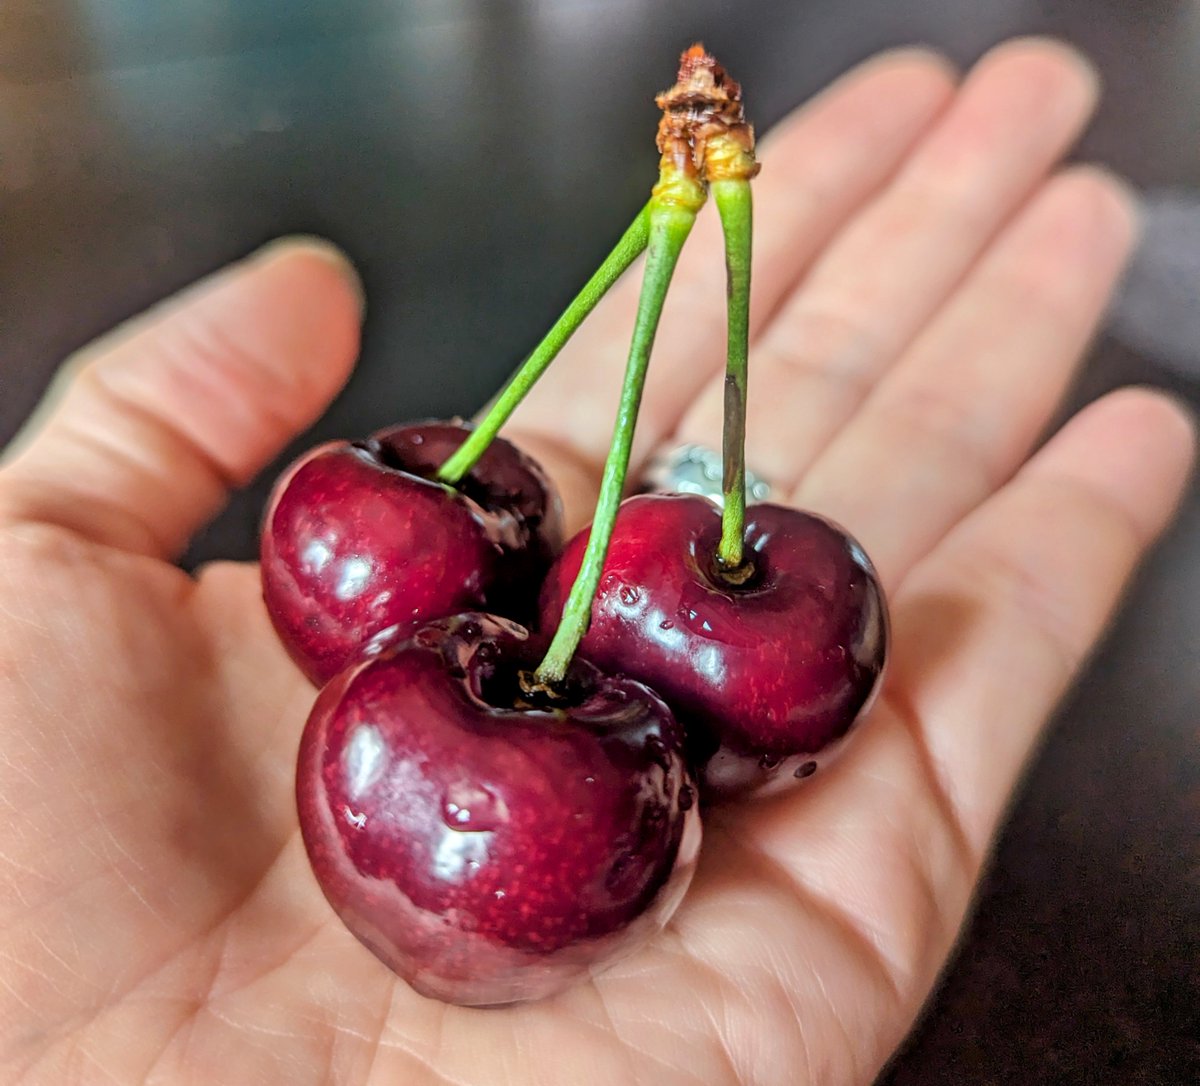 Try me. 🍒

Eat one to remember the sweetest memories of your past.

Eat one to relish the fleeting, never-to-be-captured moment that makes up the present.

Eat one to welcome your future without fear, but with curiosity and an open mind.

Try me. 🍒

#EverydayMagic